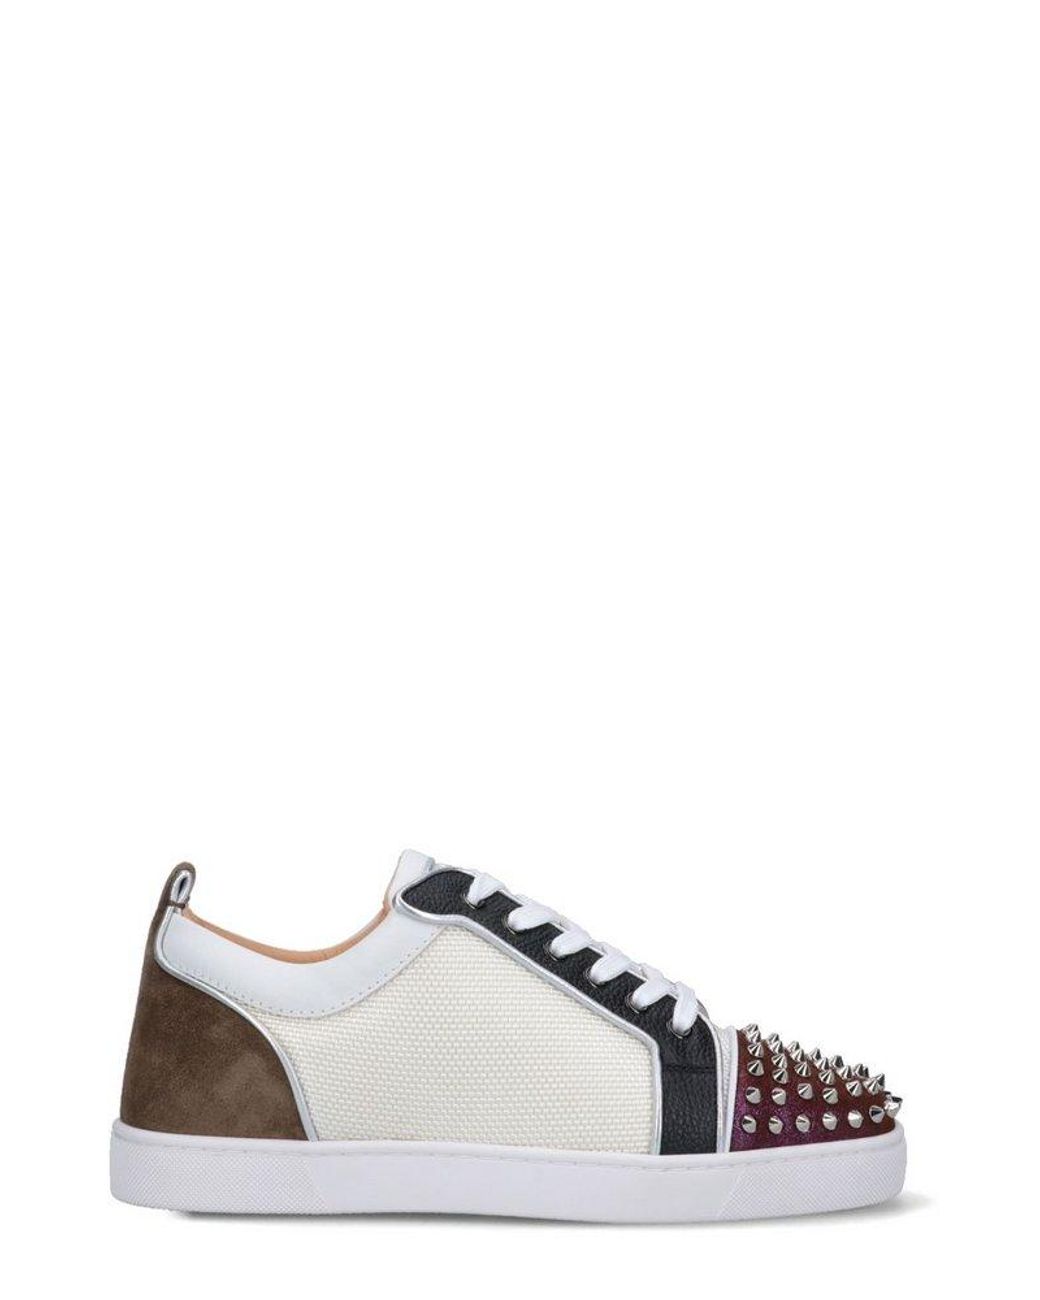 Louis Junior Spikes - Sneakers - Calf leather - White - Christian